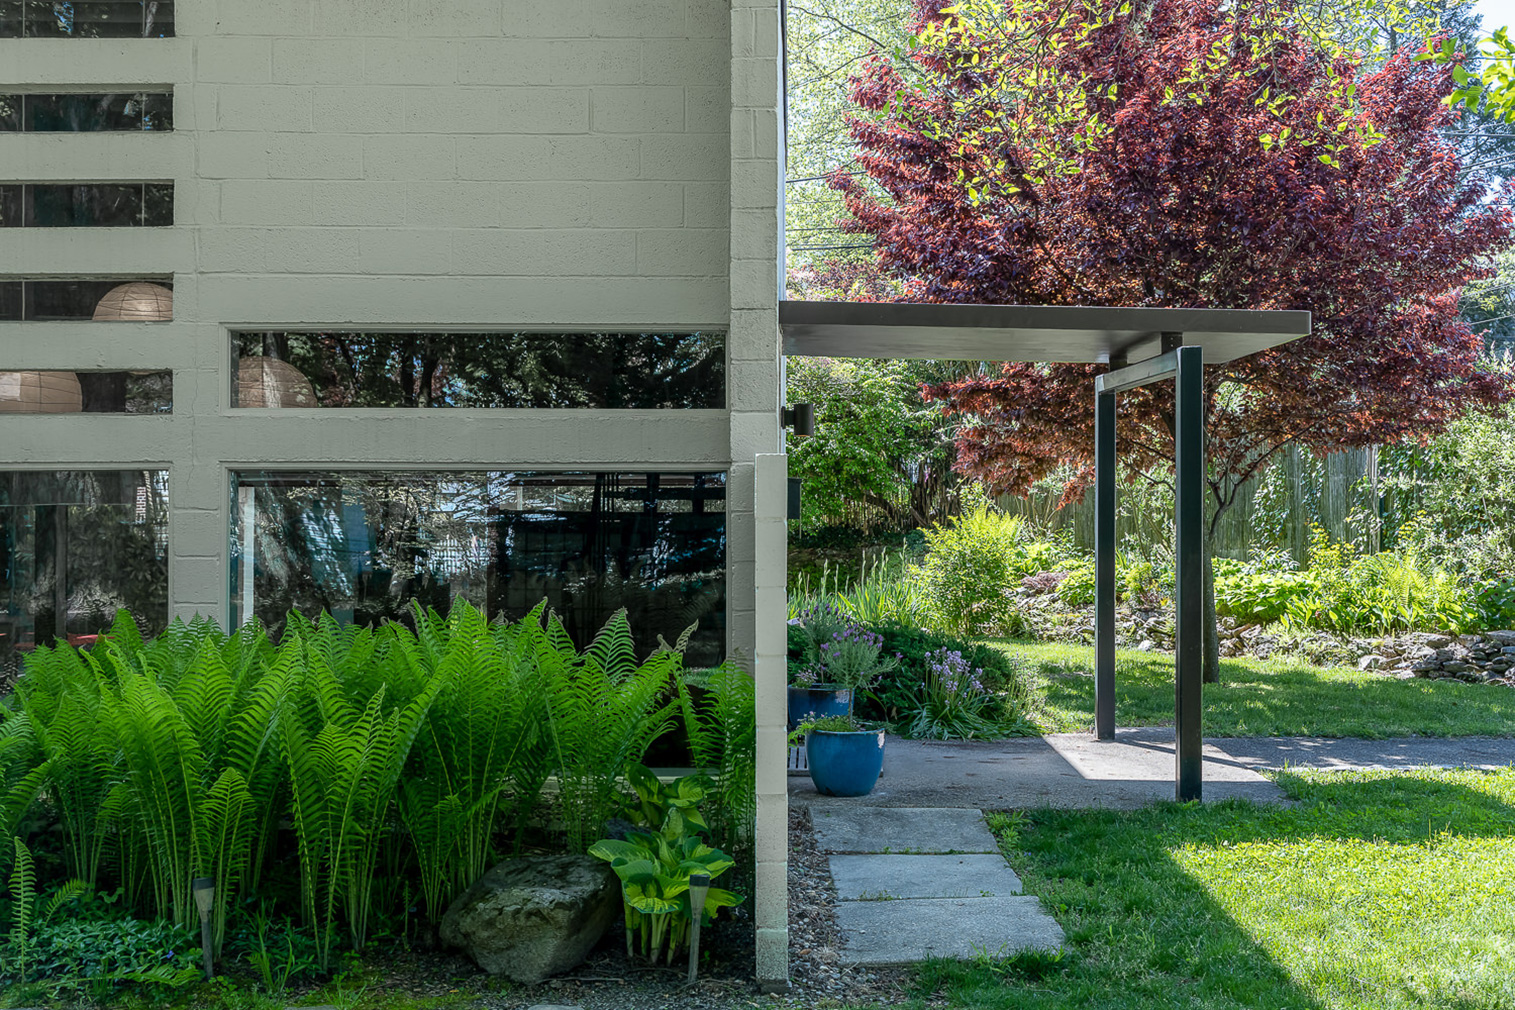 Midcentury style is alive and well Carner House – a $450k home in Philadelphia